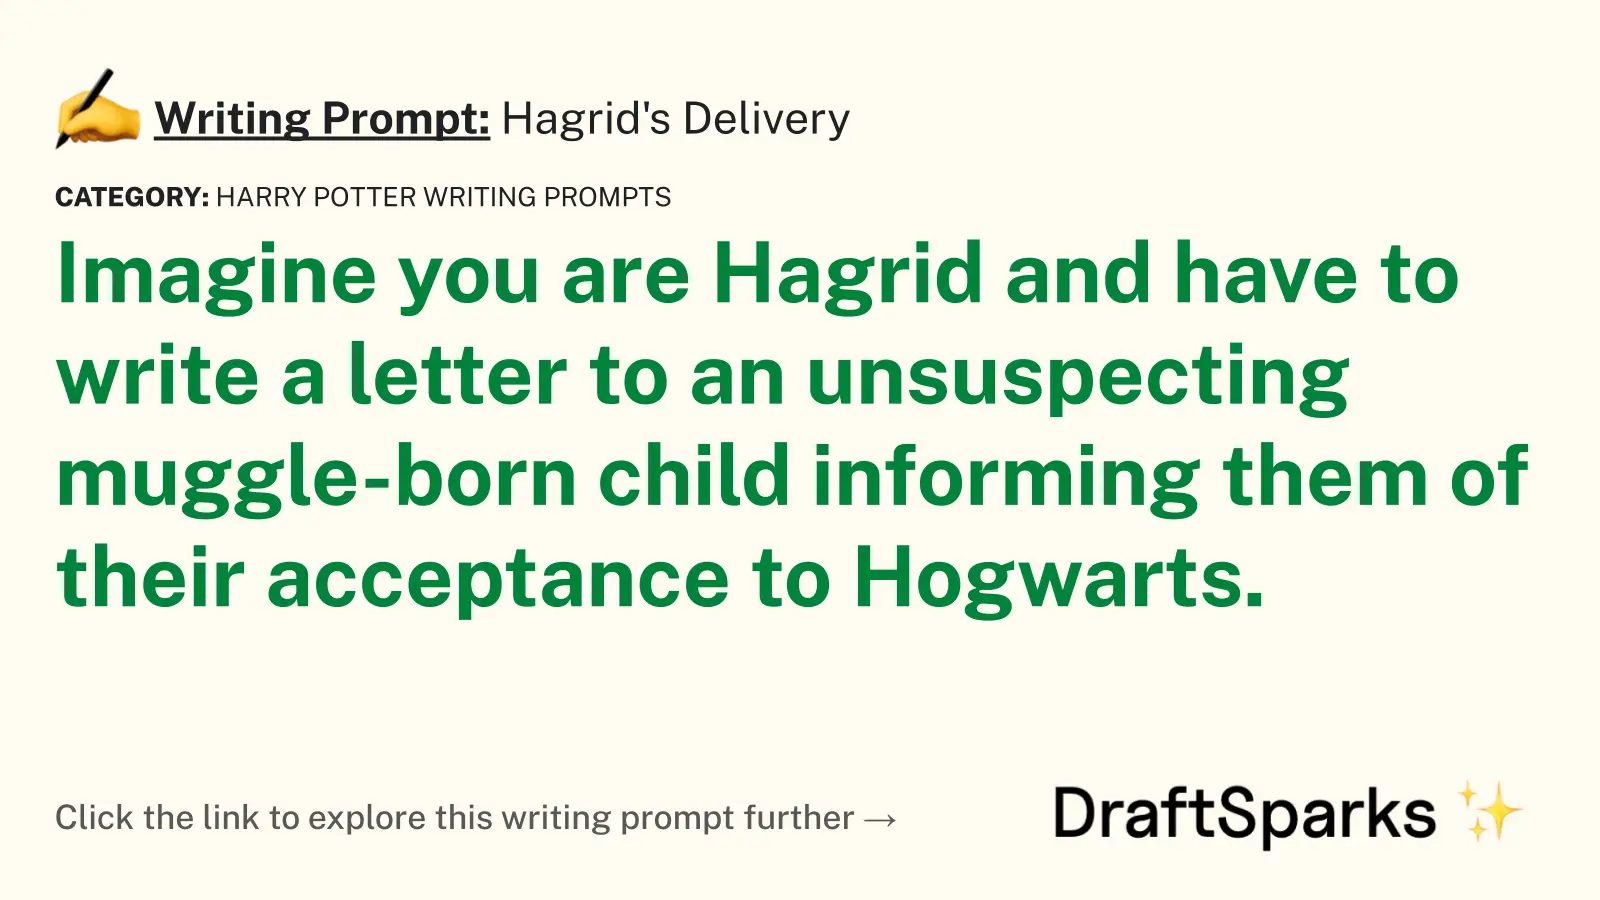 Hagrid’s Delivery